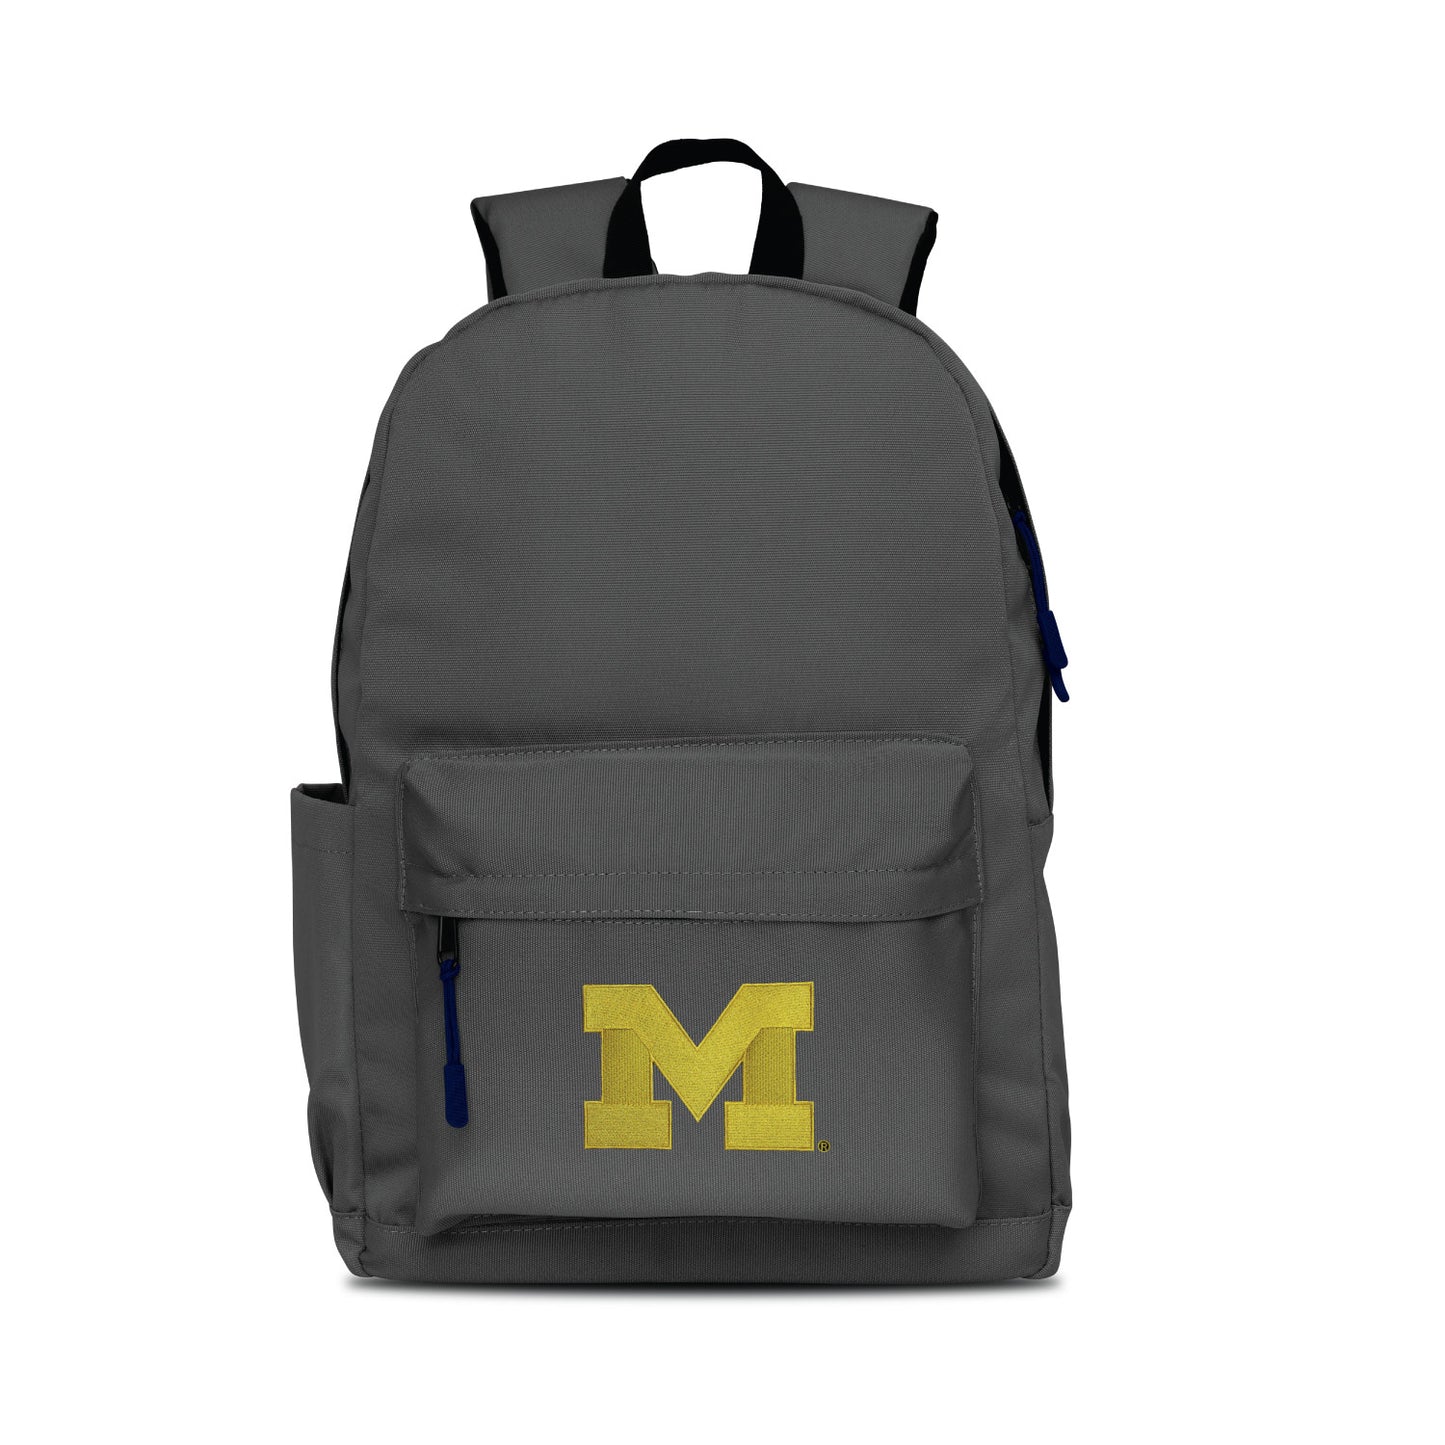 Michigan Wolverines Campus Laptop Backpack- Gray